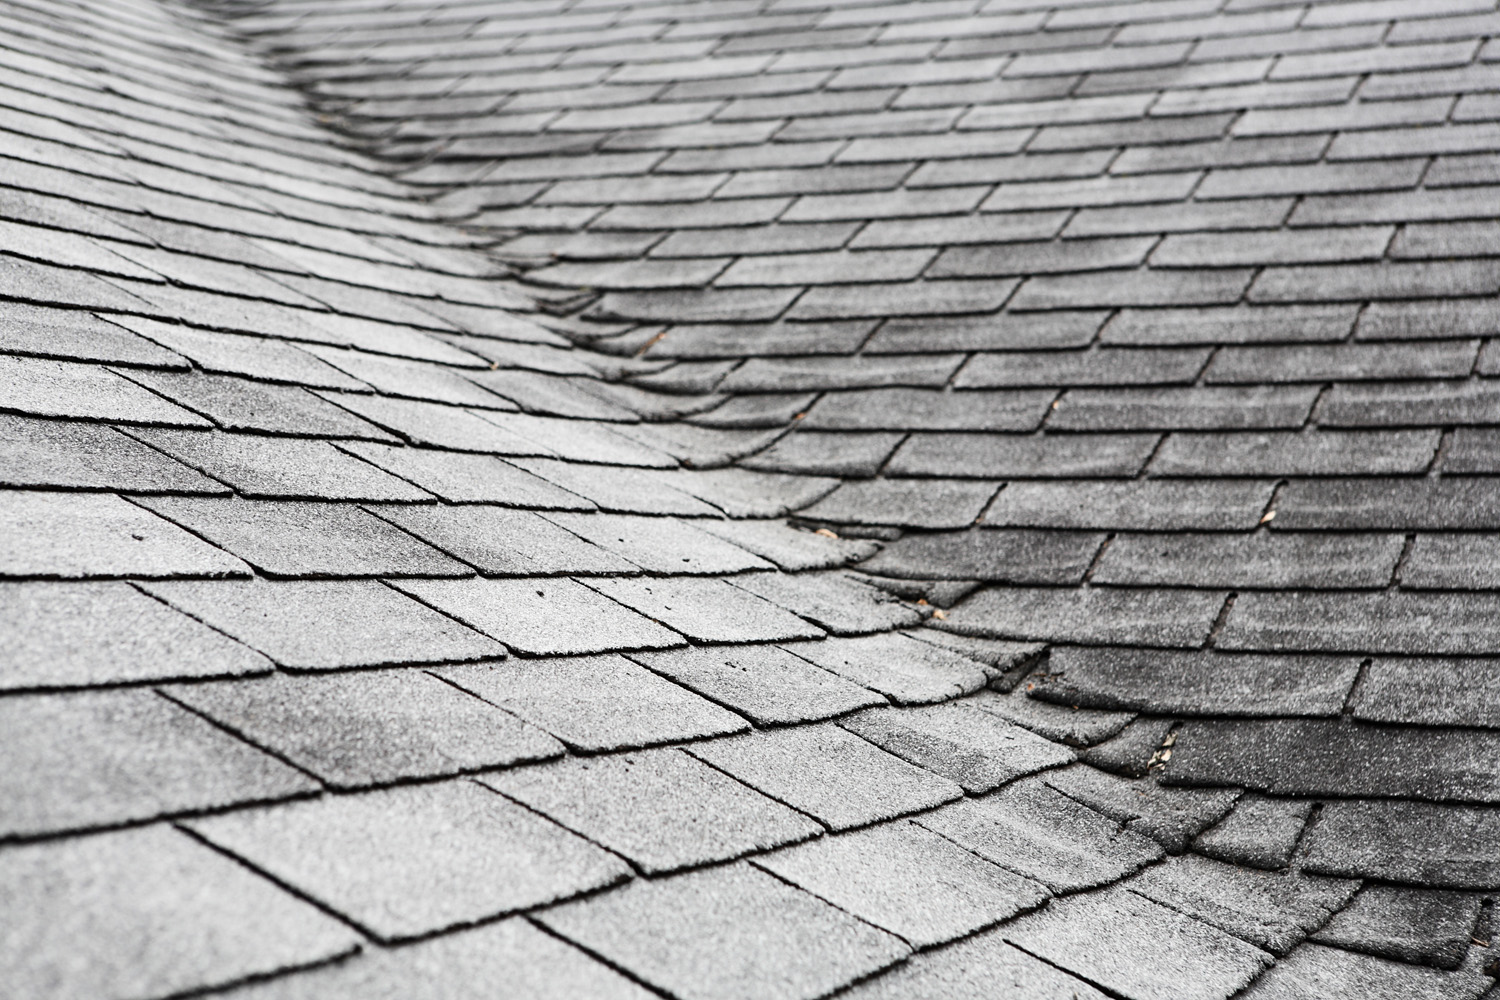 Keeping tabs on your roof doesn’t have to be difficult